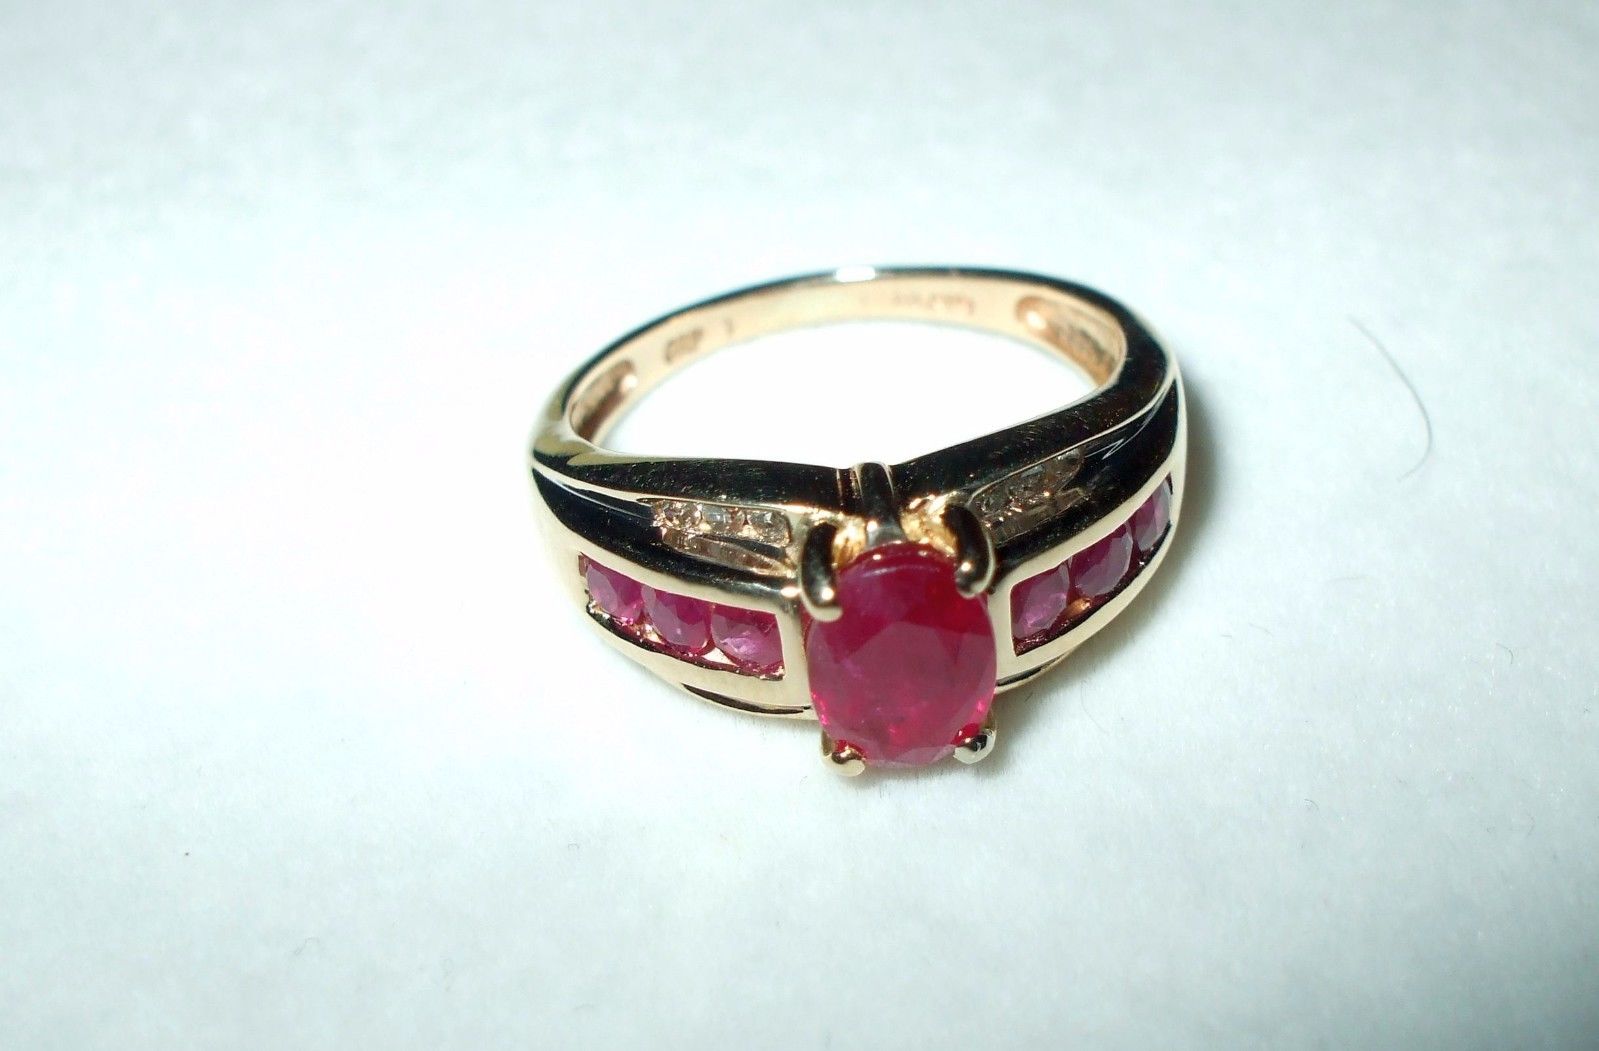 Genuine 1.0 ct Oval Ruby & Diamond Ring 14K yellow gold $2500 NWT